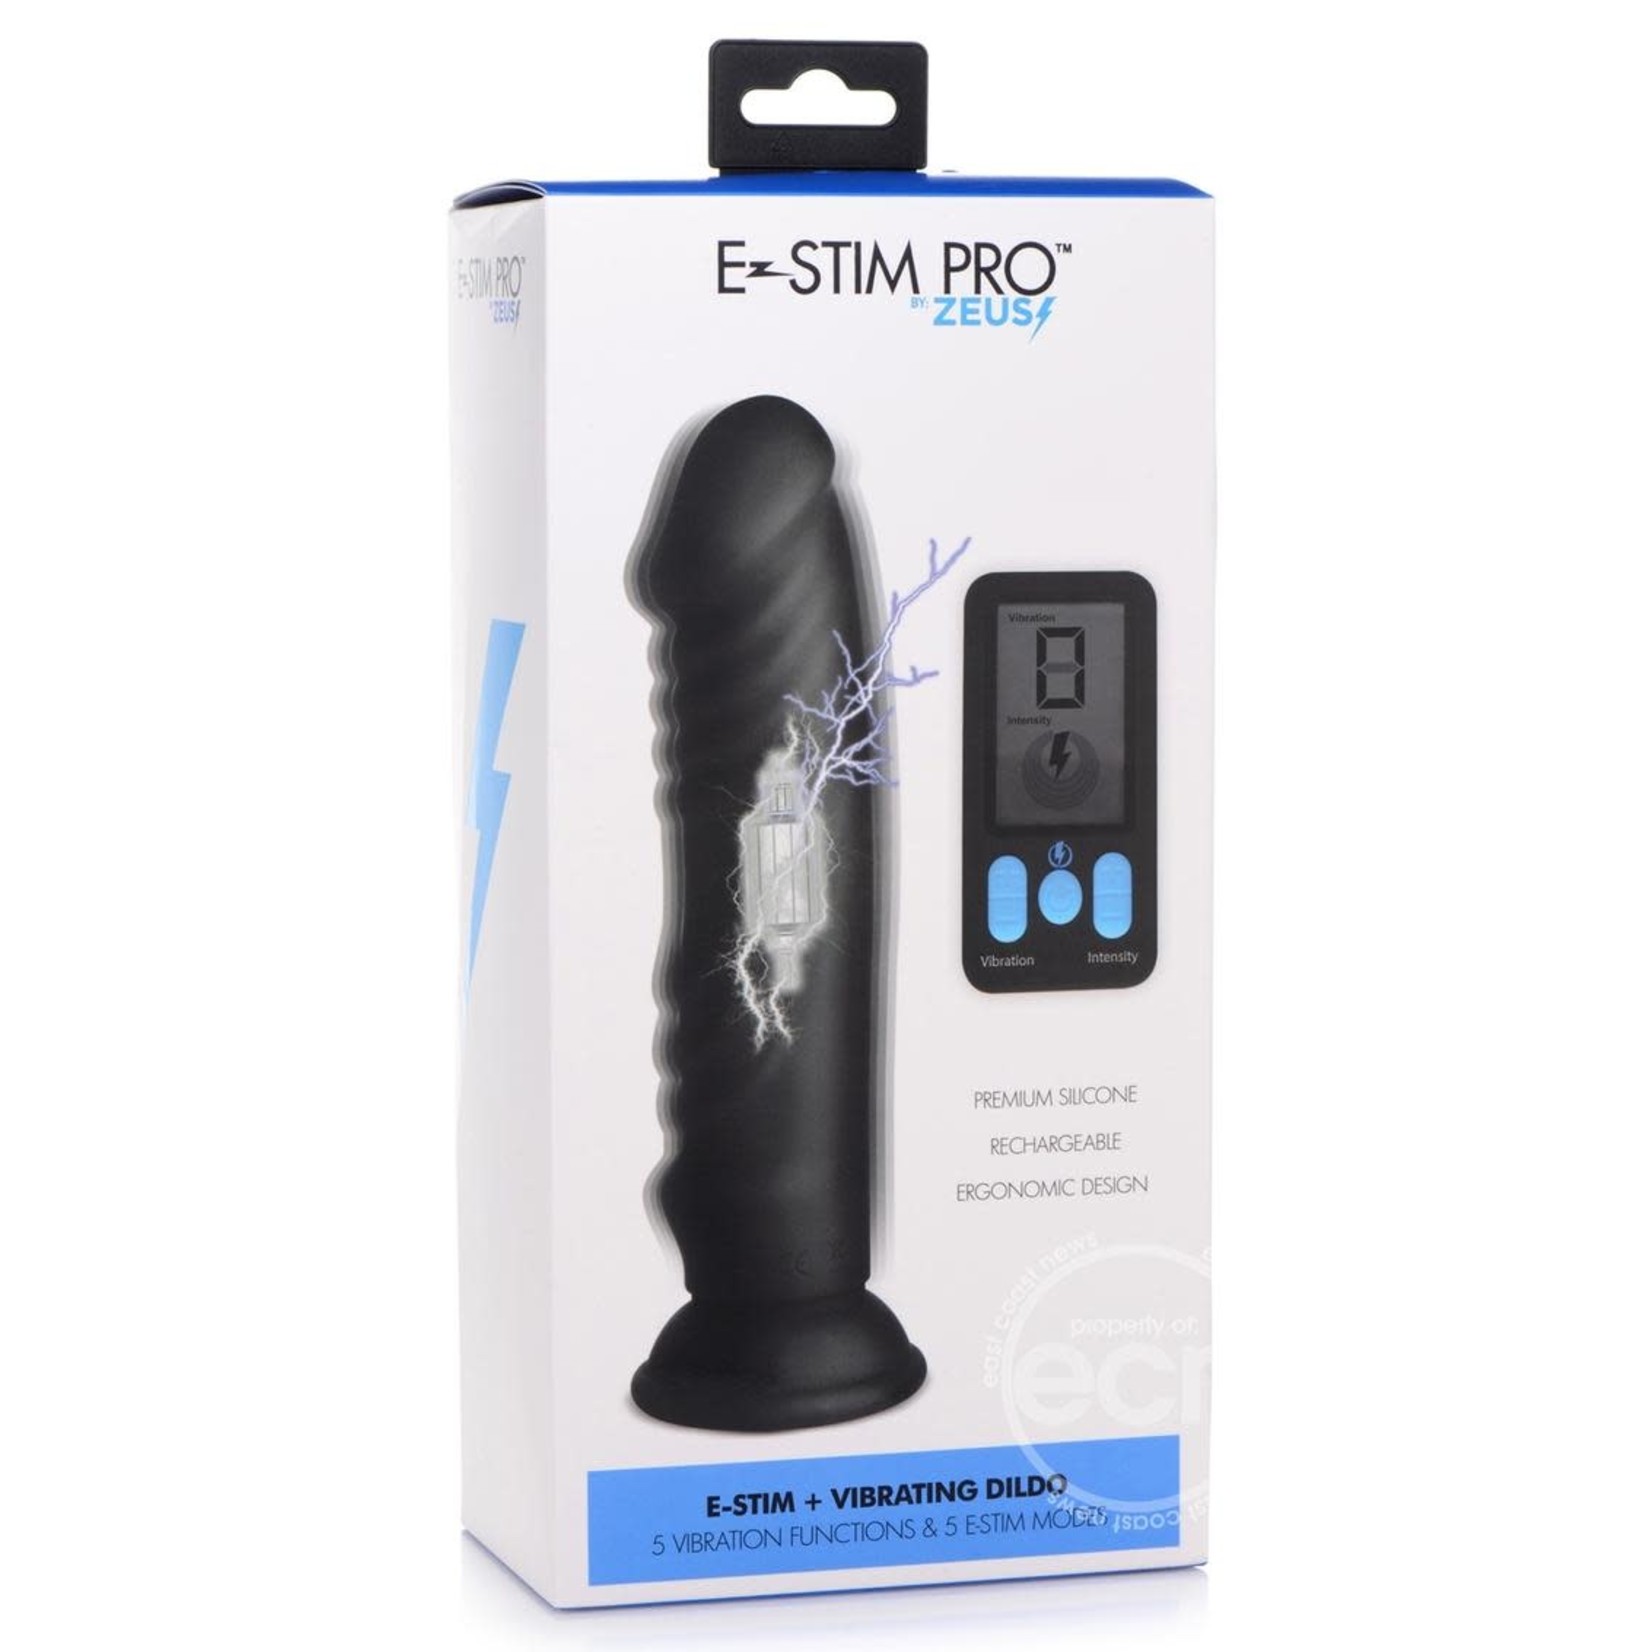 Zeus Vibrating & E-Stim Rechargeable Silicone Dildo with Remote Control 7.9in - Black